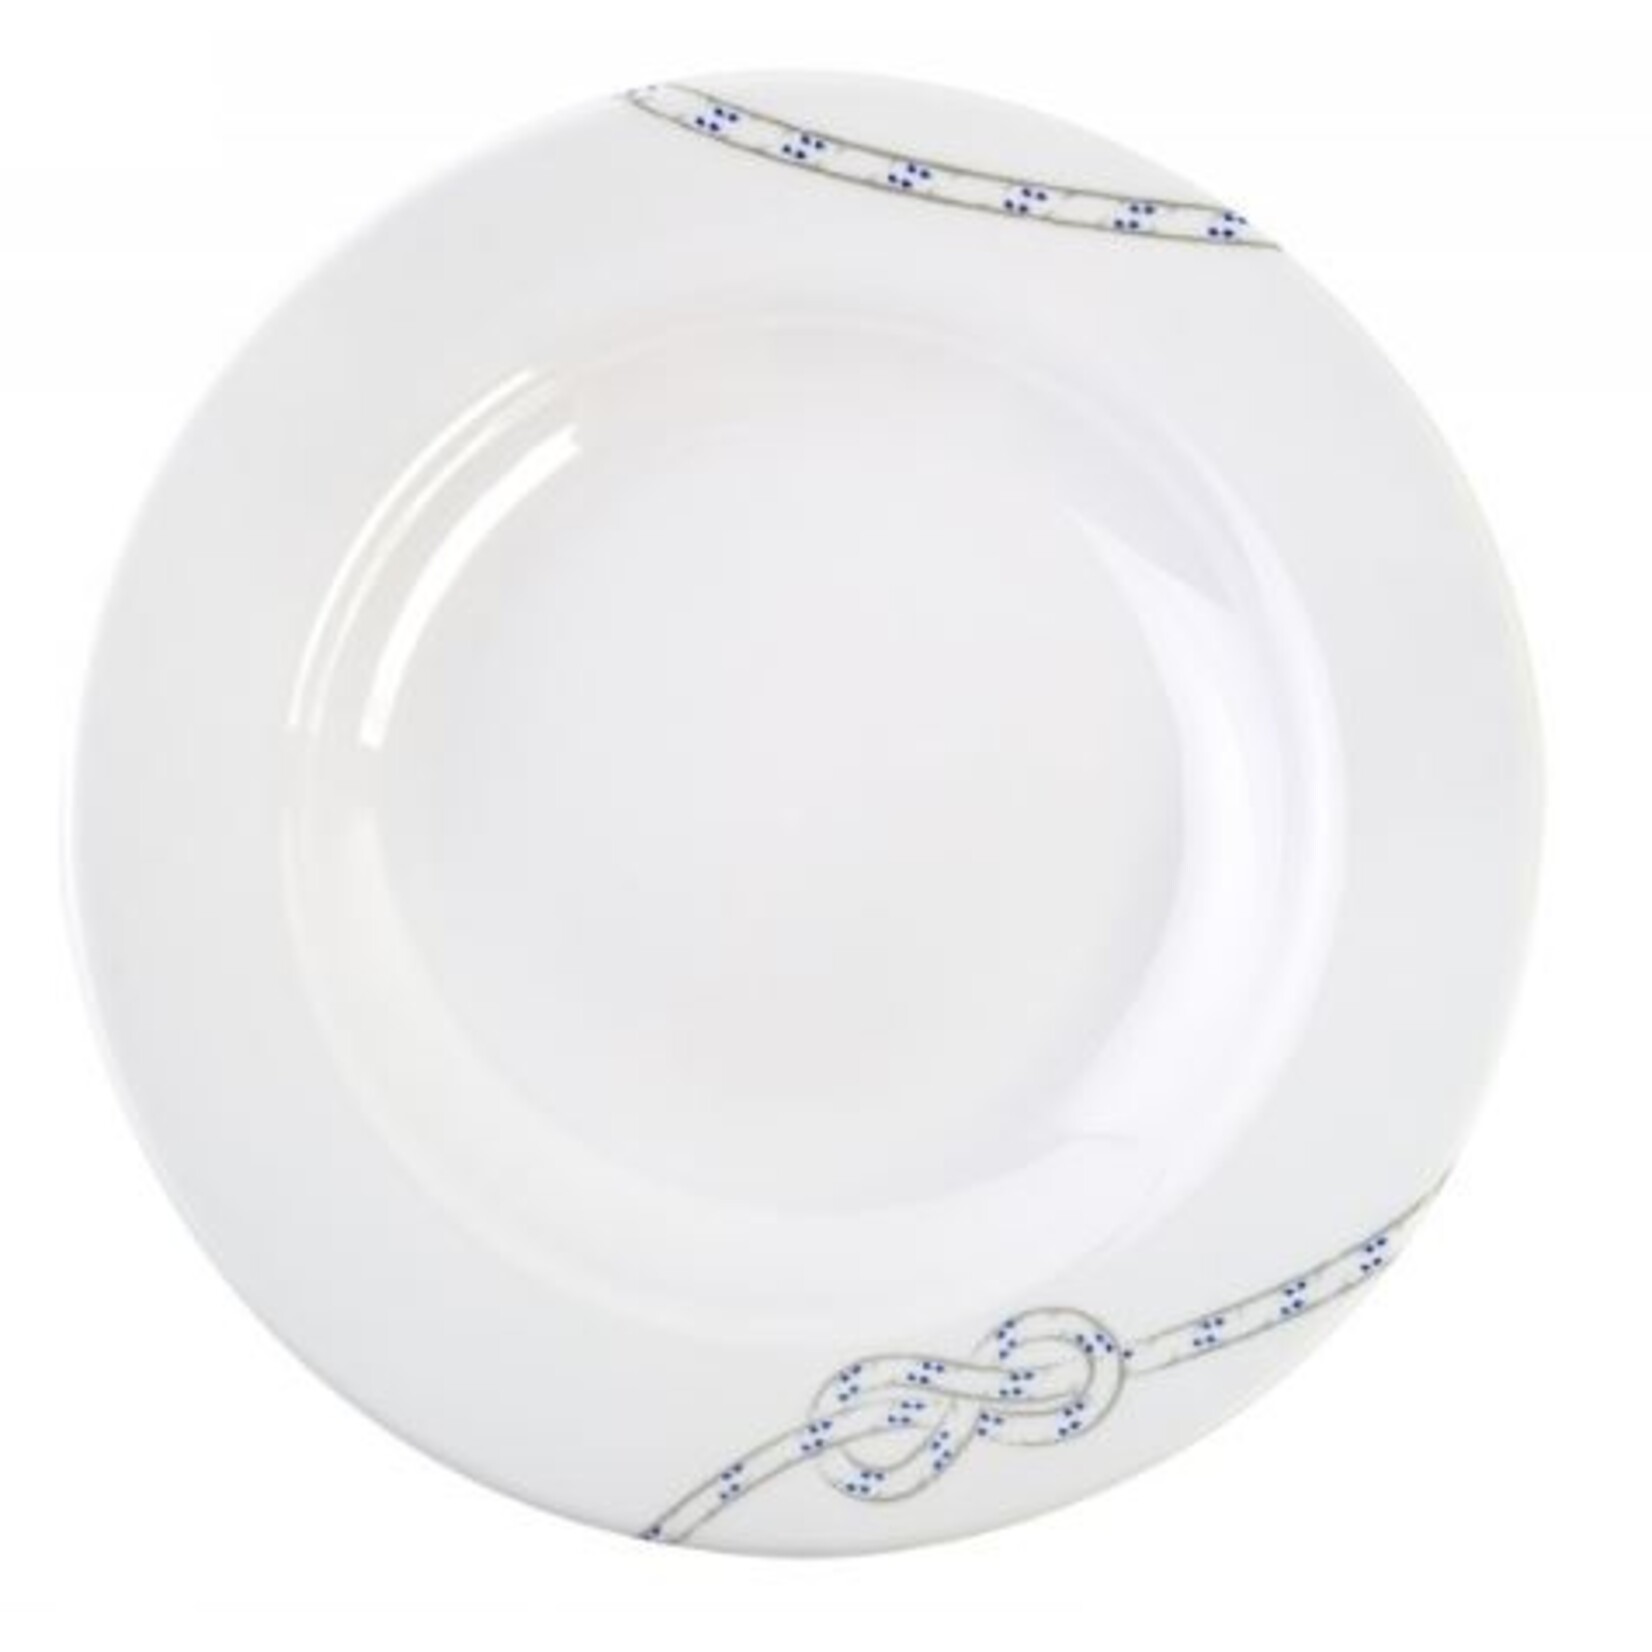 Plastimo South pacific soup plate